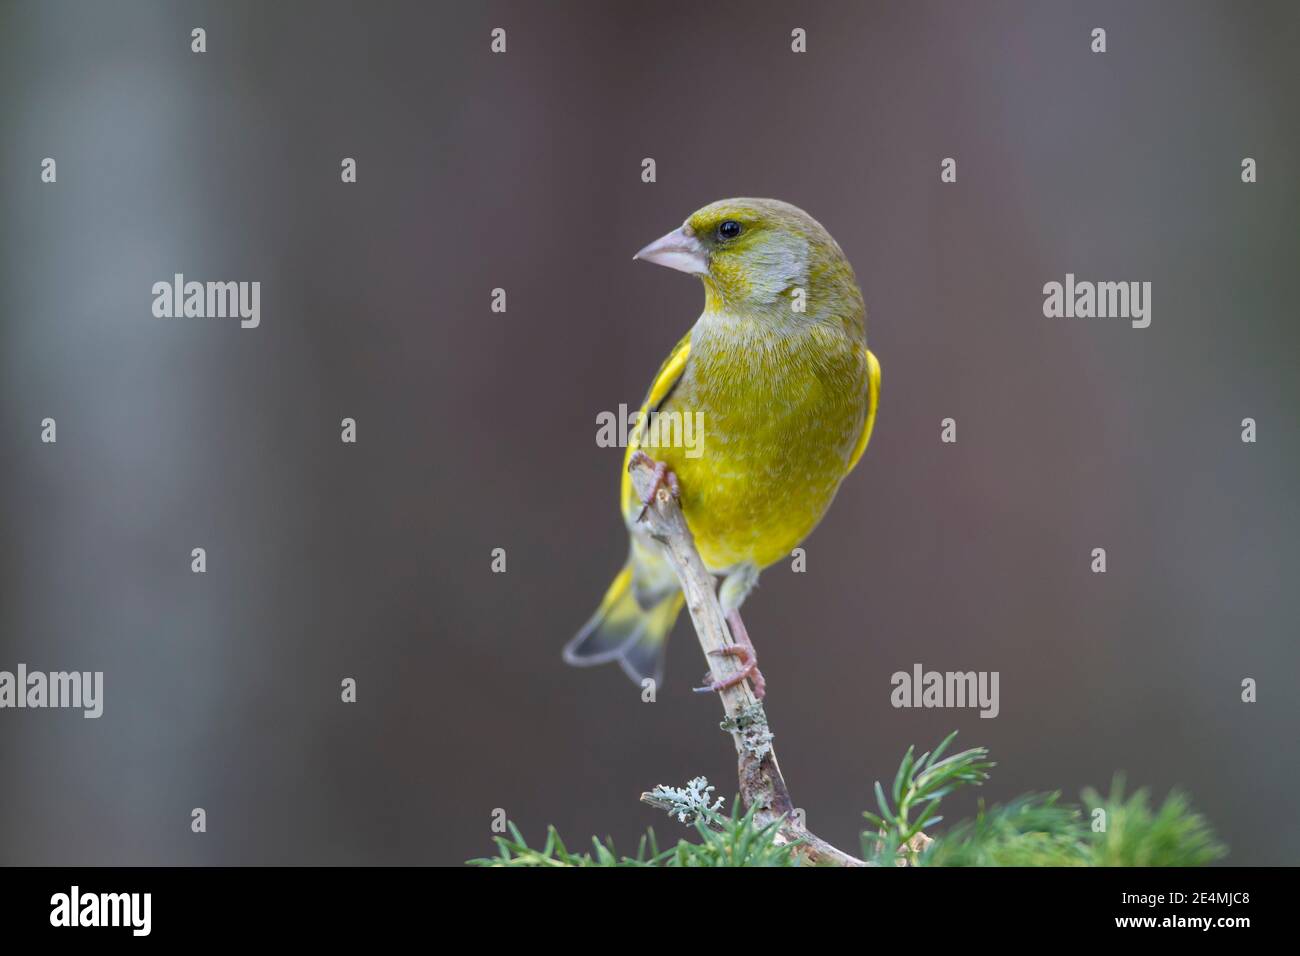 Adult Male European Greenfinch Chloris chloris clinging to a small branch at the top of a pine tree against a clean background in Norway during winter Stock Photo